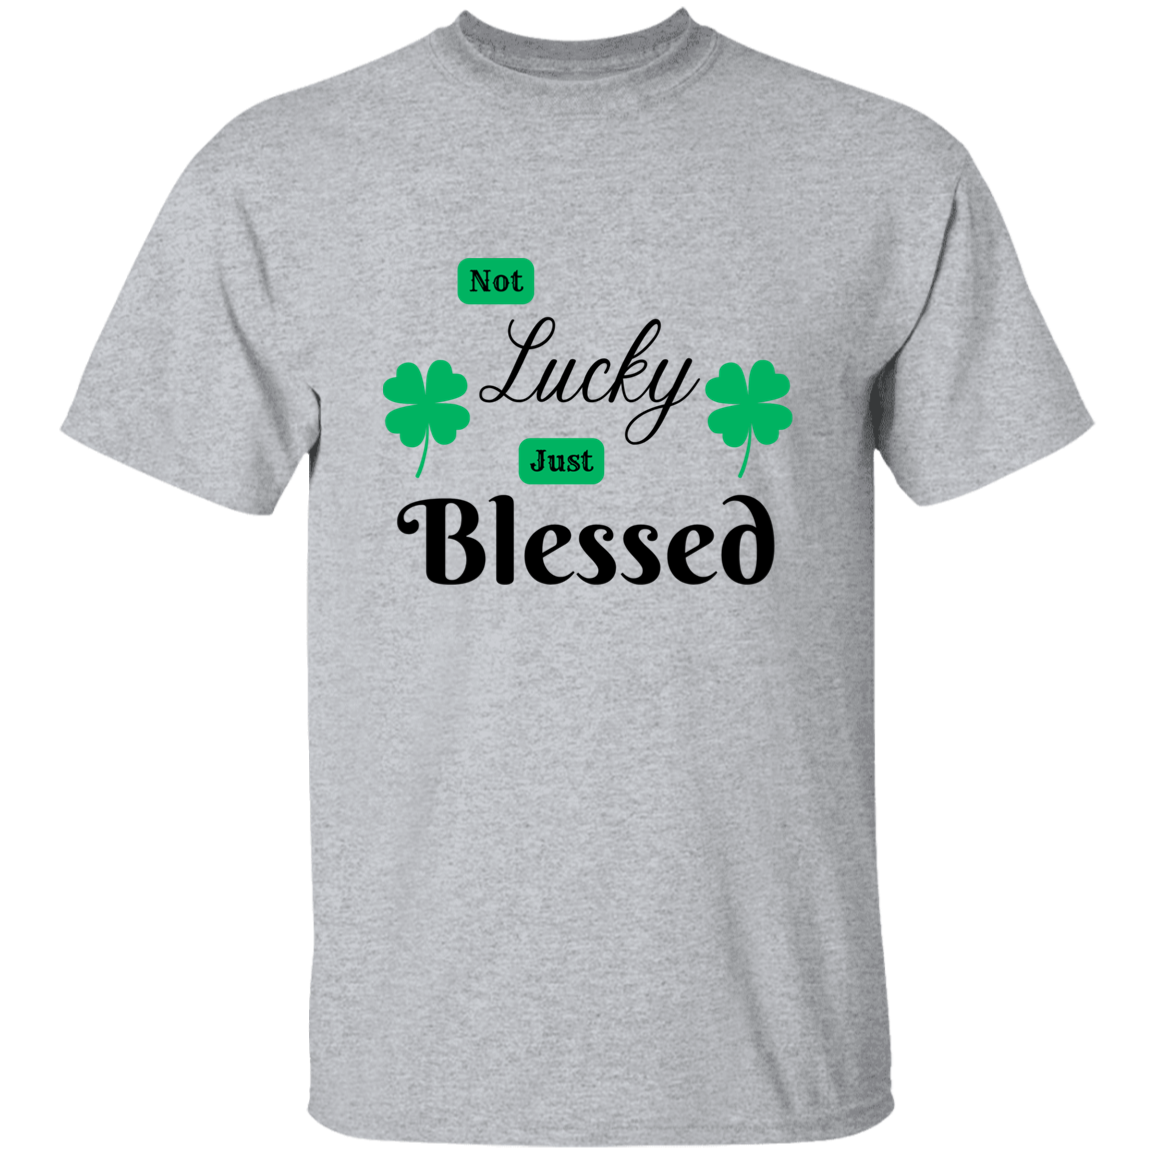 Not Lucky Just Blessed T-Shirt